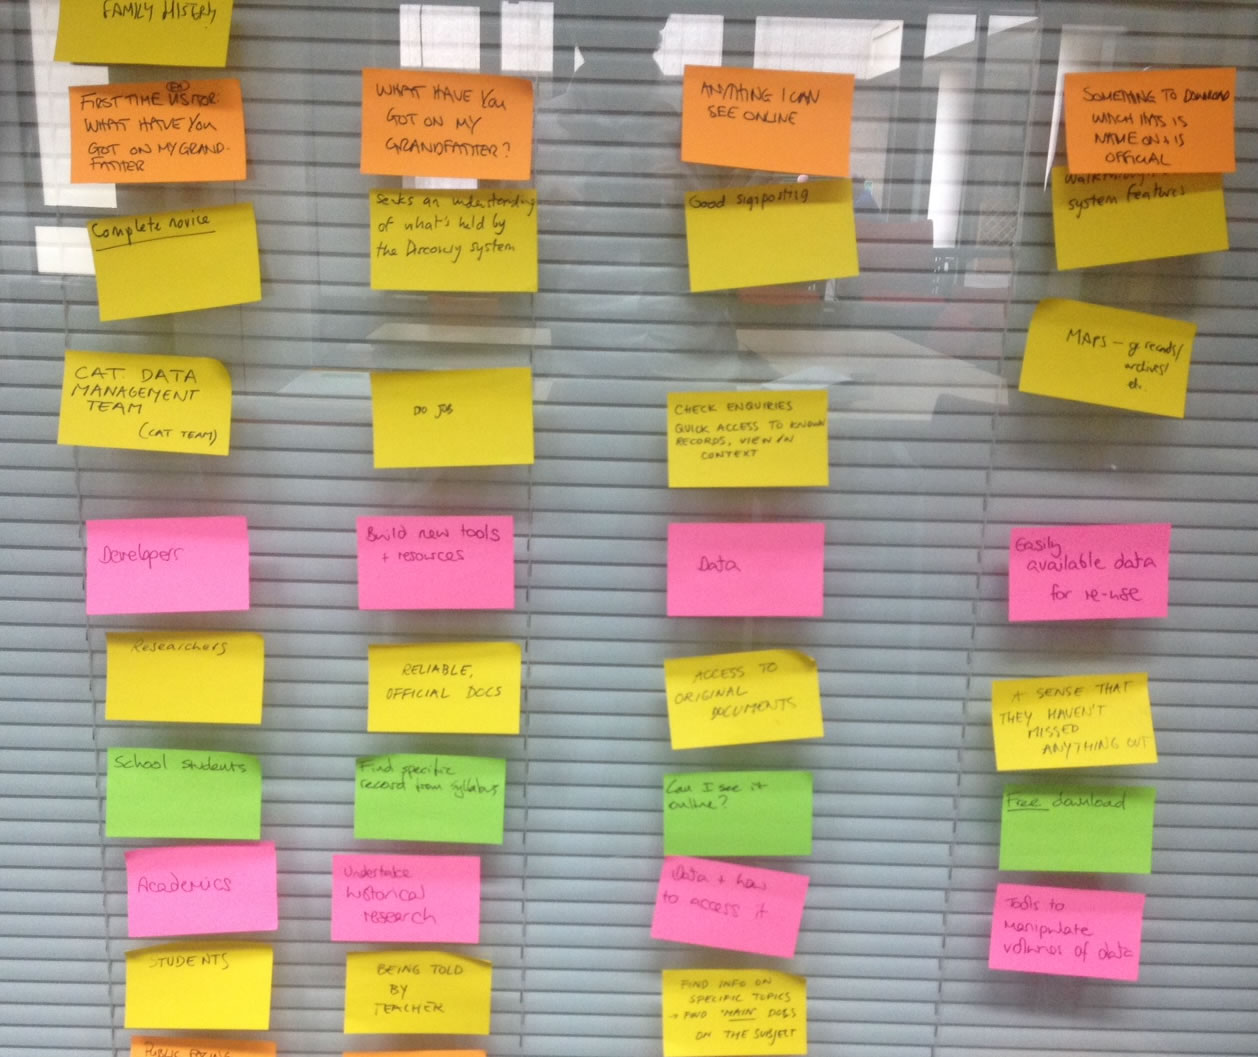 Post-it notes mapping out who our users are, and what they want